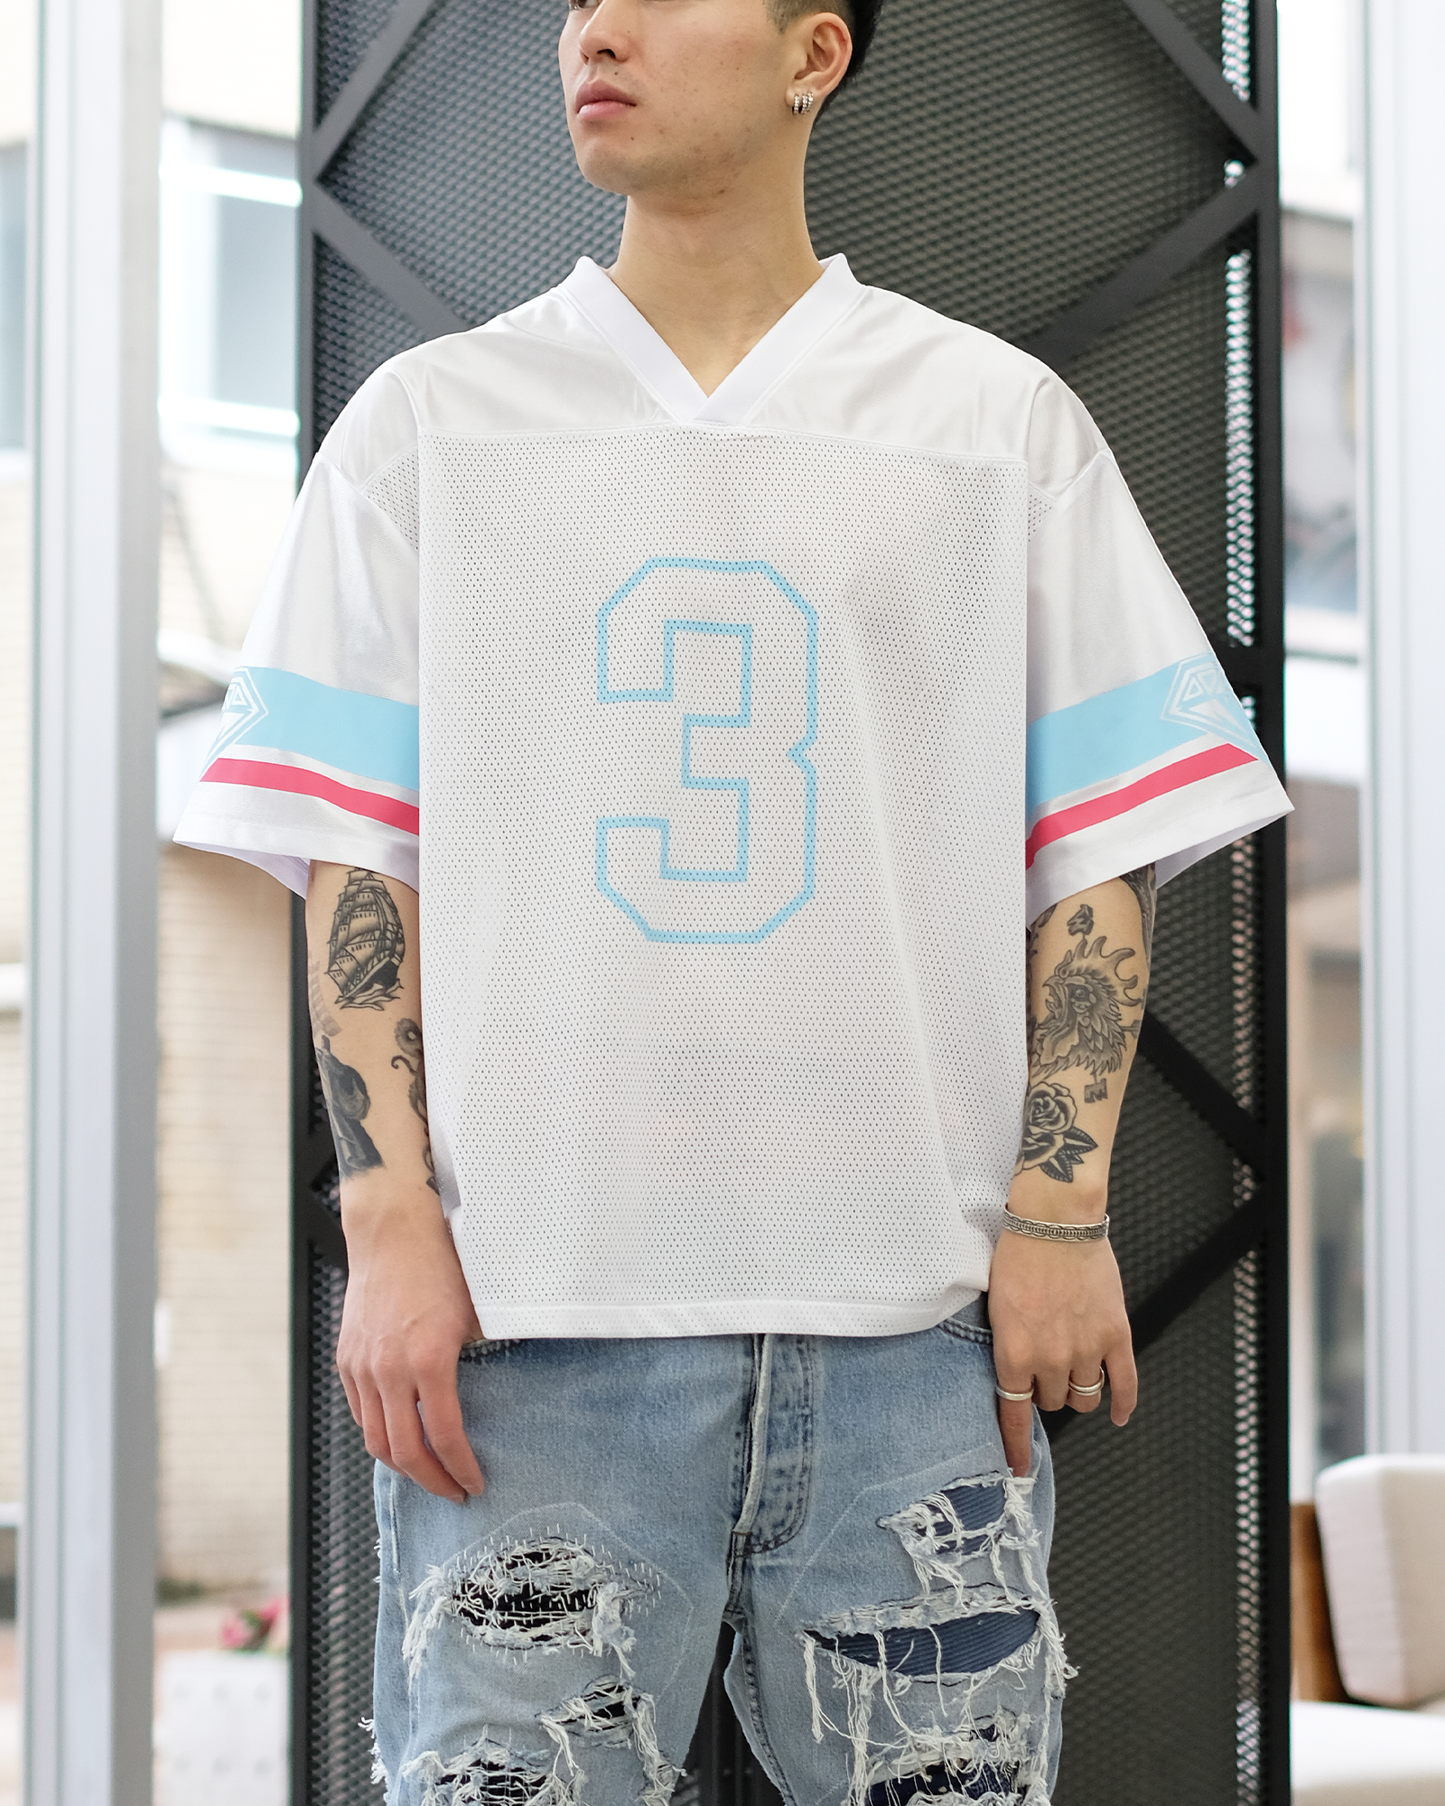 BBC/BB RING OF HONOR CROPPED FIT MESH JERSEY/メッシュTシャツ/White